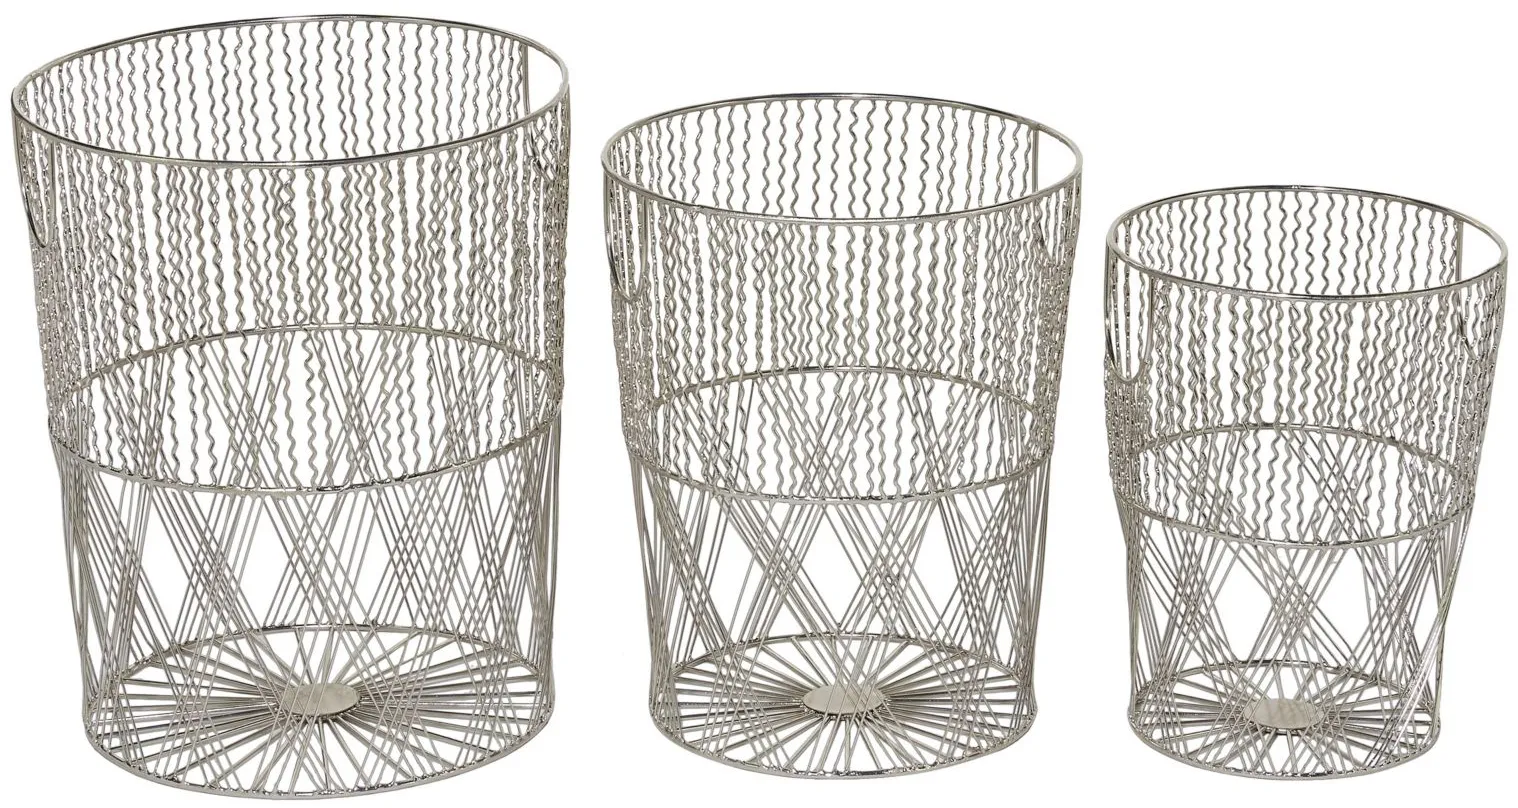 Ivy Collection Set of 3 Silver Metal Bins in Silver by UMA Enterprises